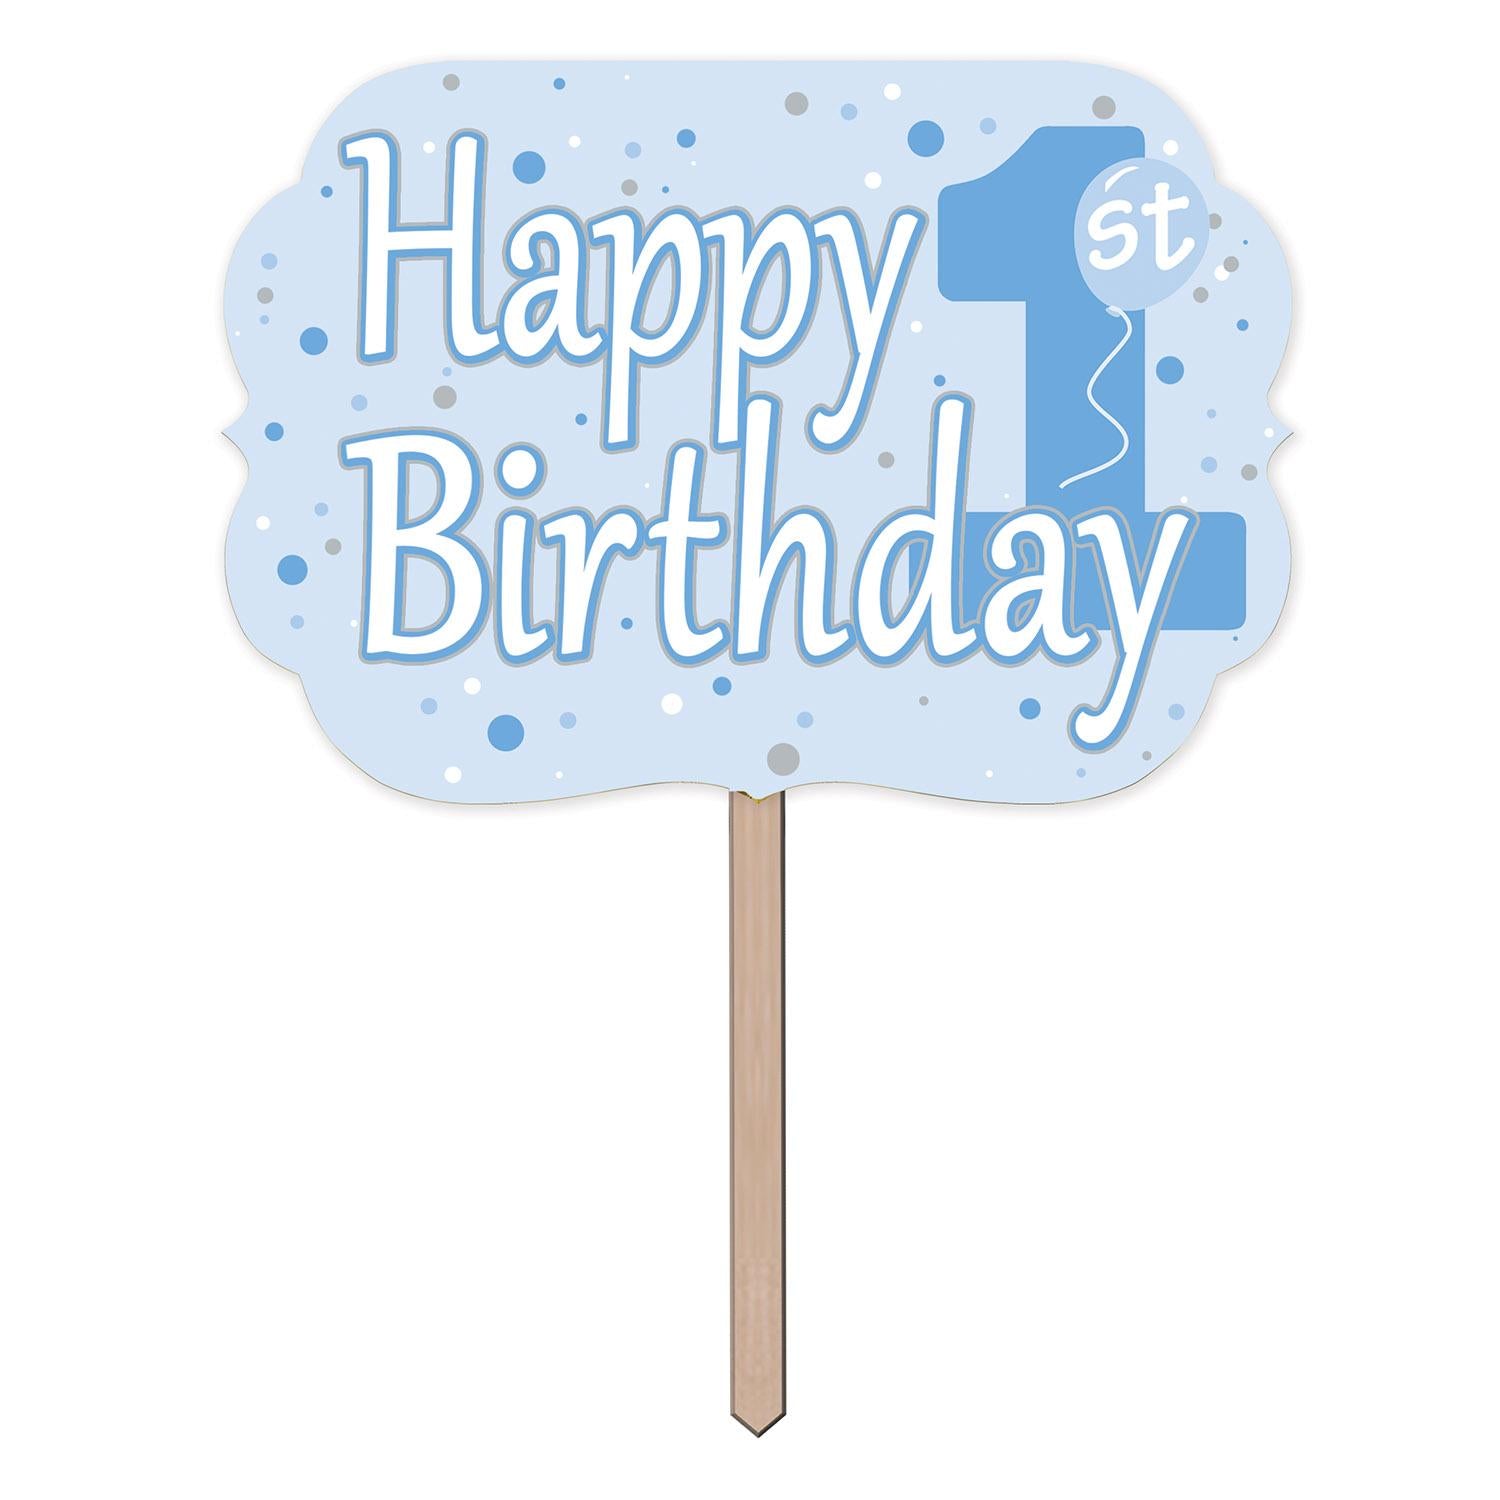 Beistle 1st Birthday Party Yard Sign - Blue